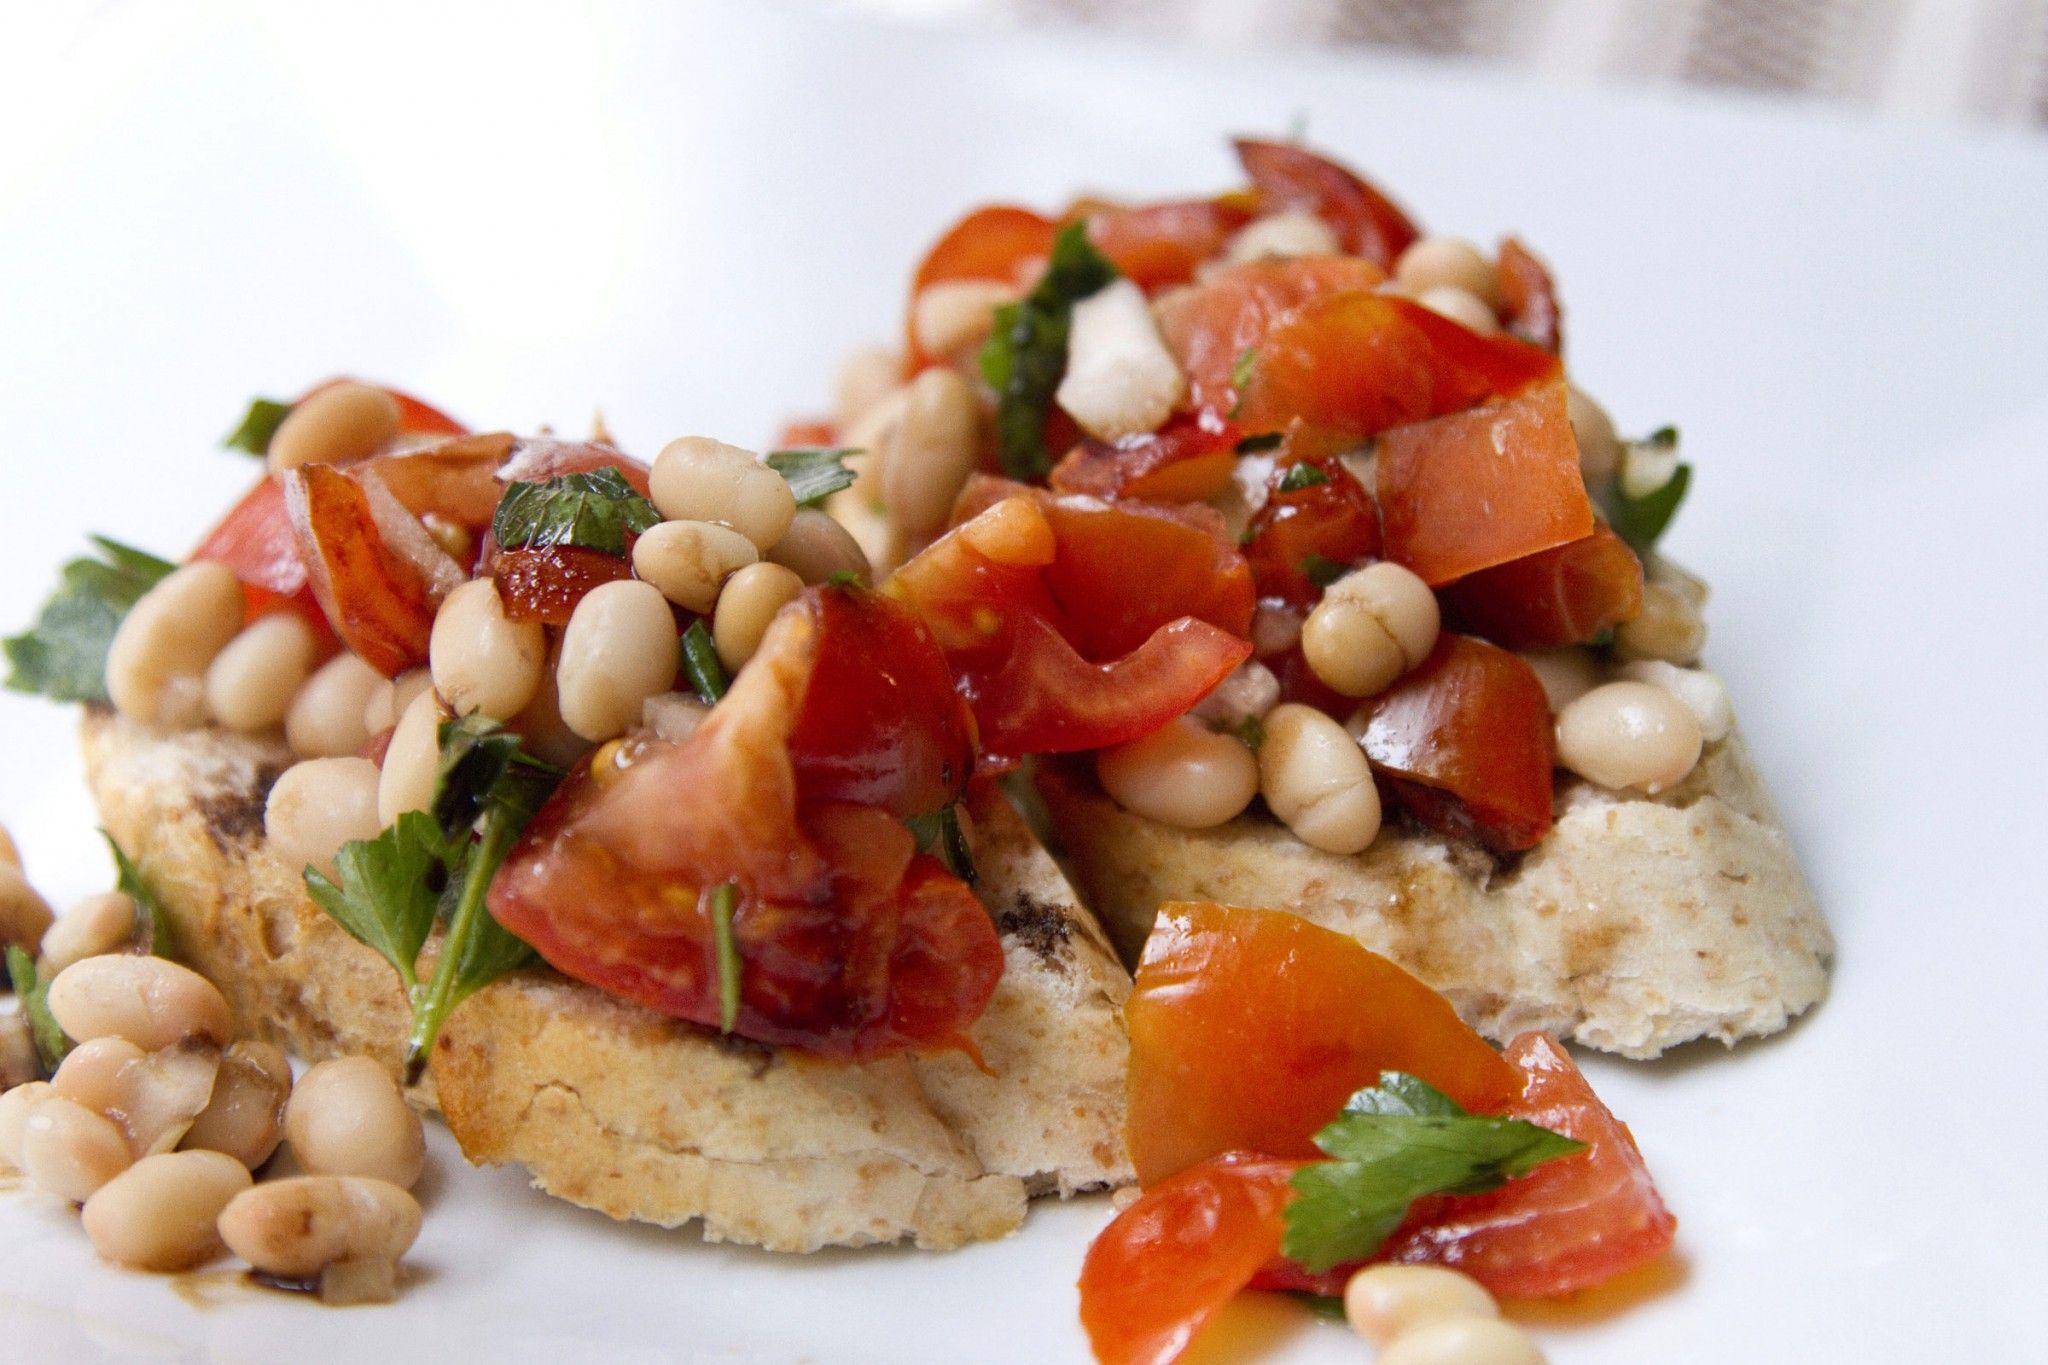 Organic Crispy Bruschetta with White cheddar, Tomatoes, and Olives